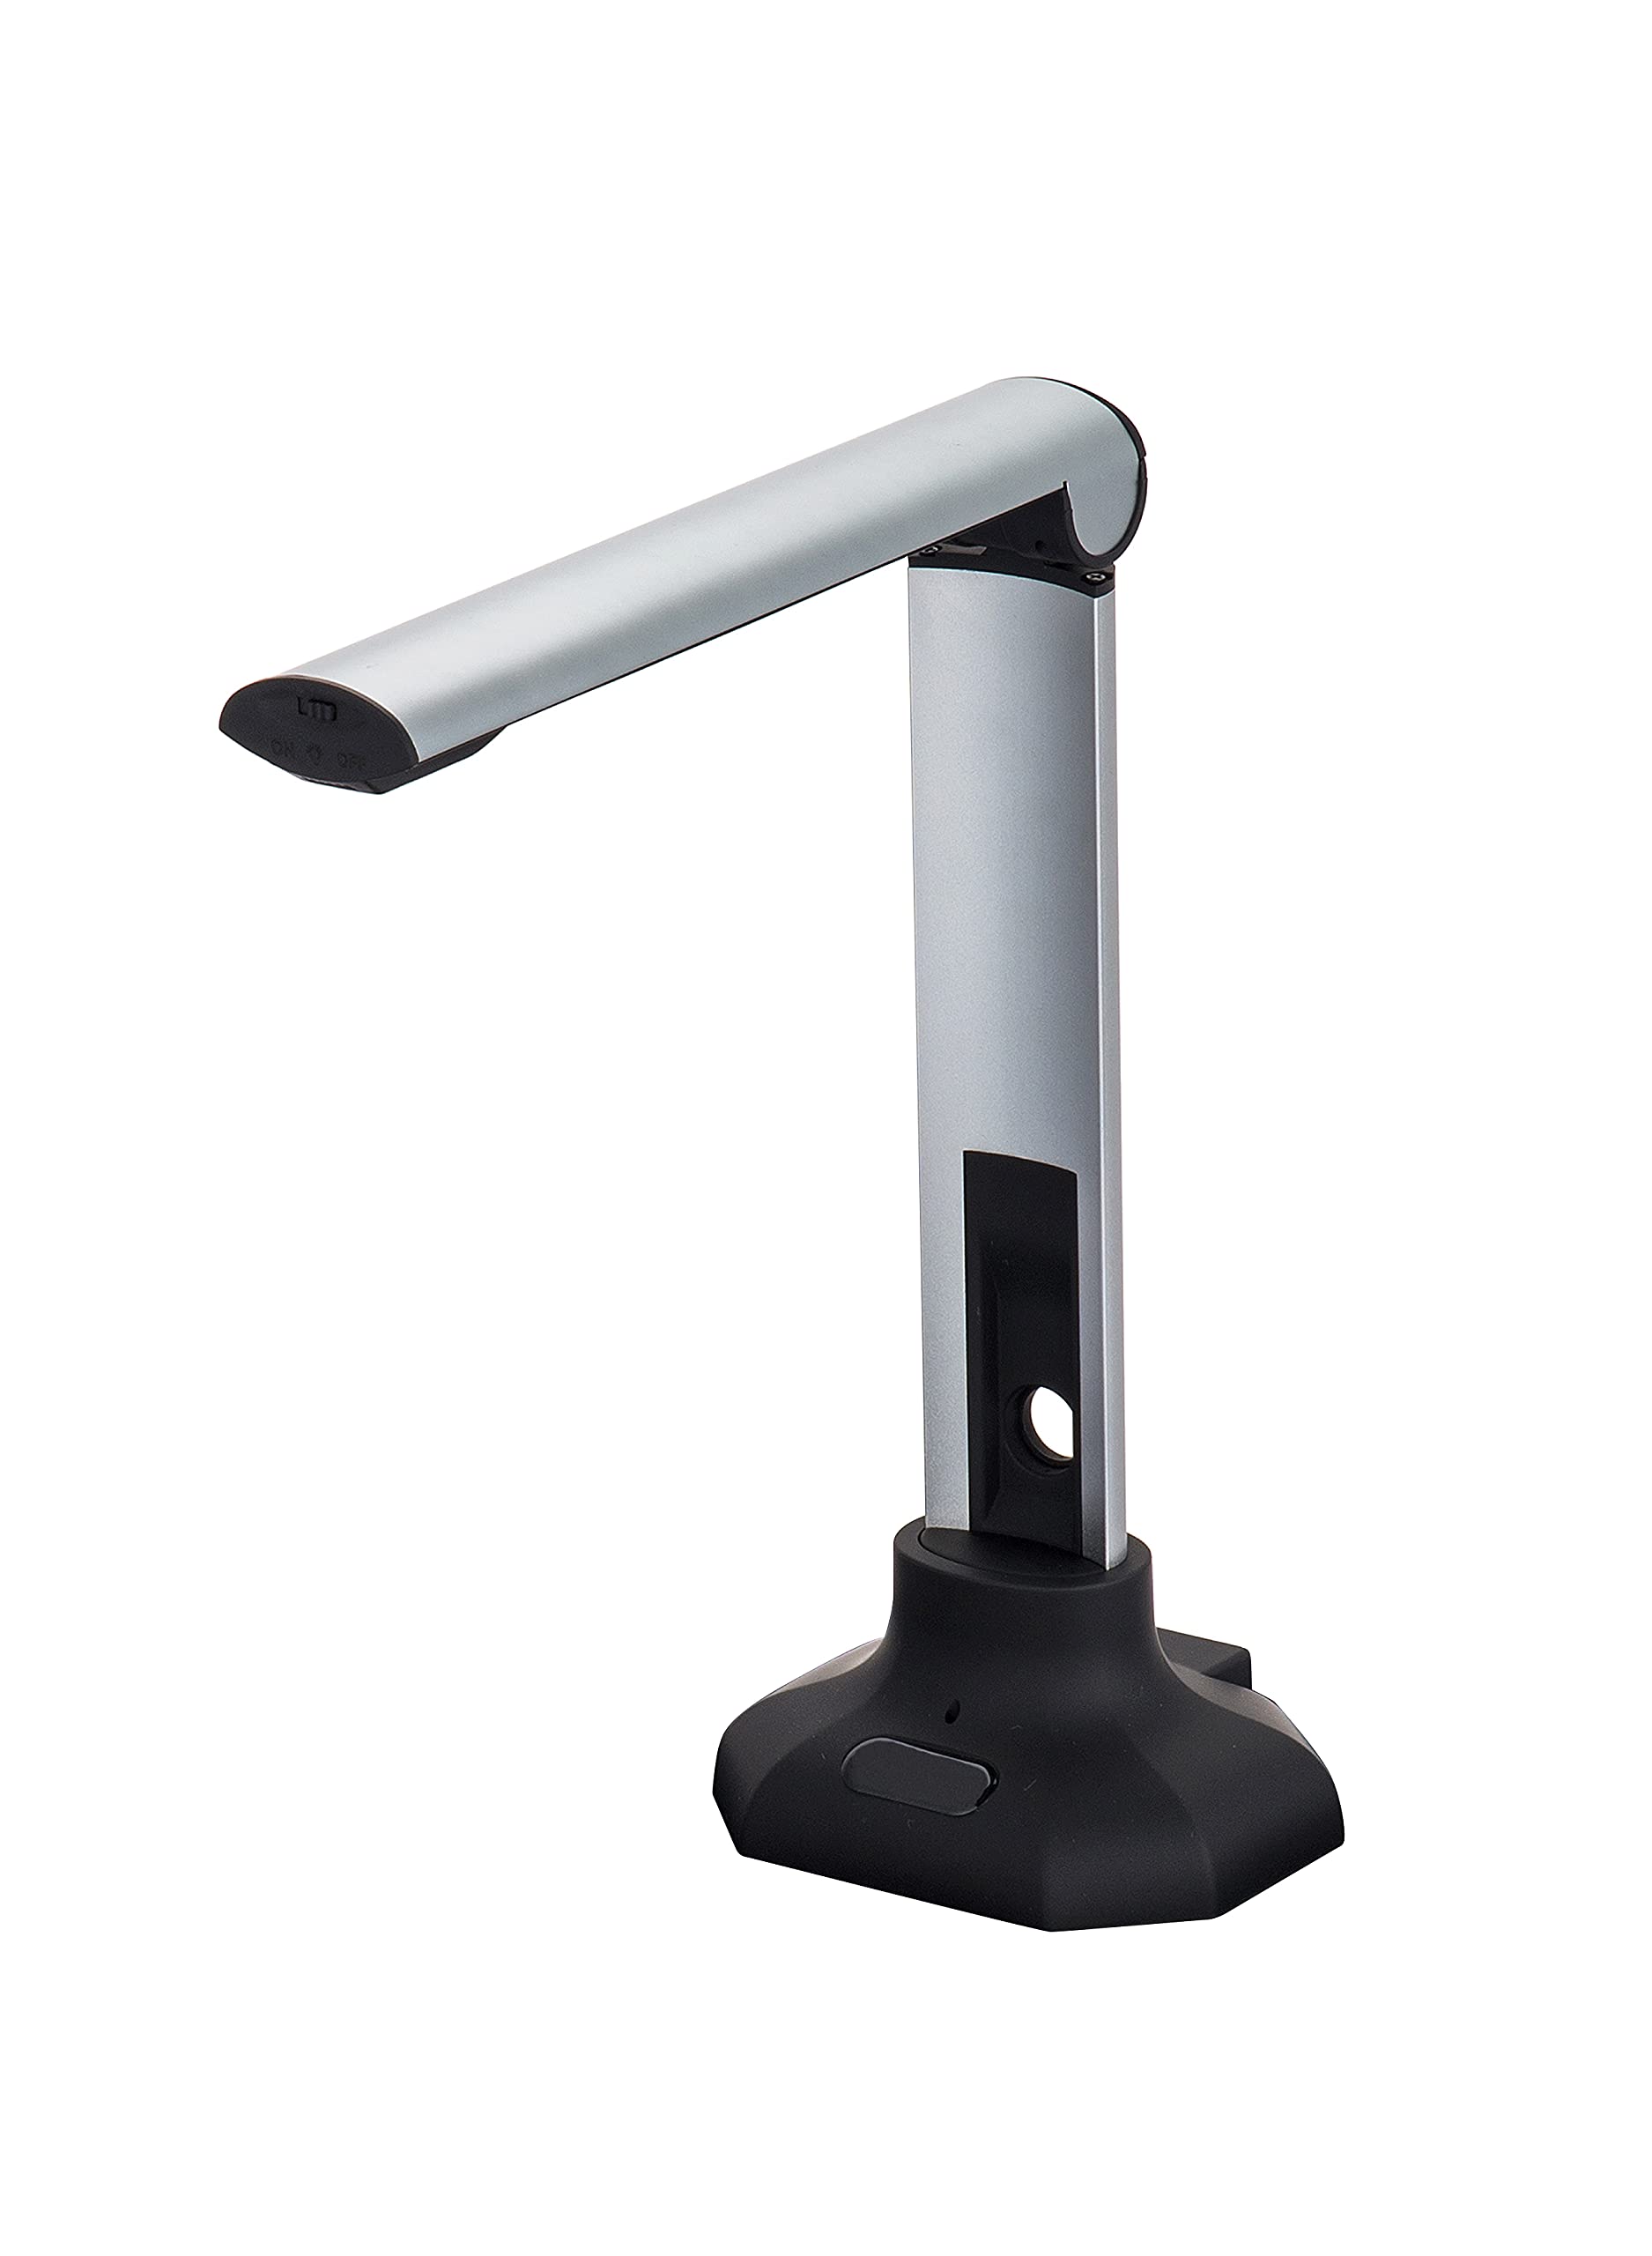 QOMO Portable 8.0 MP USB Document Camera with Built-in Mic and LED Light for MAC, PC, Chromebook. Designed for Online Learning, Live Streaming, Web Meeting and Document Scanning, 2 Year Warranty